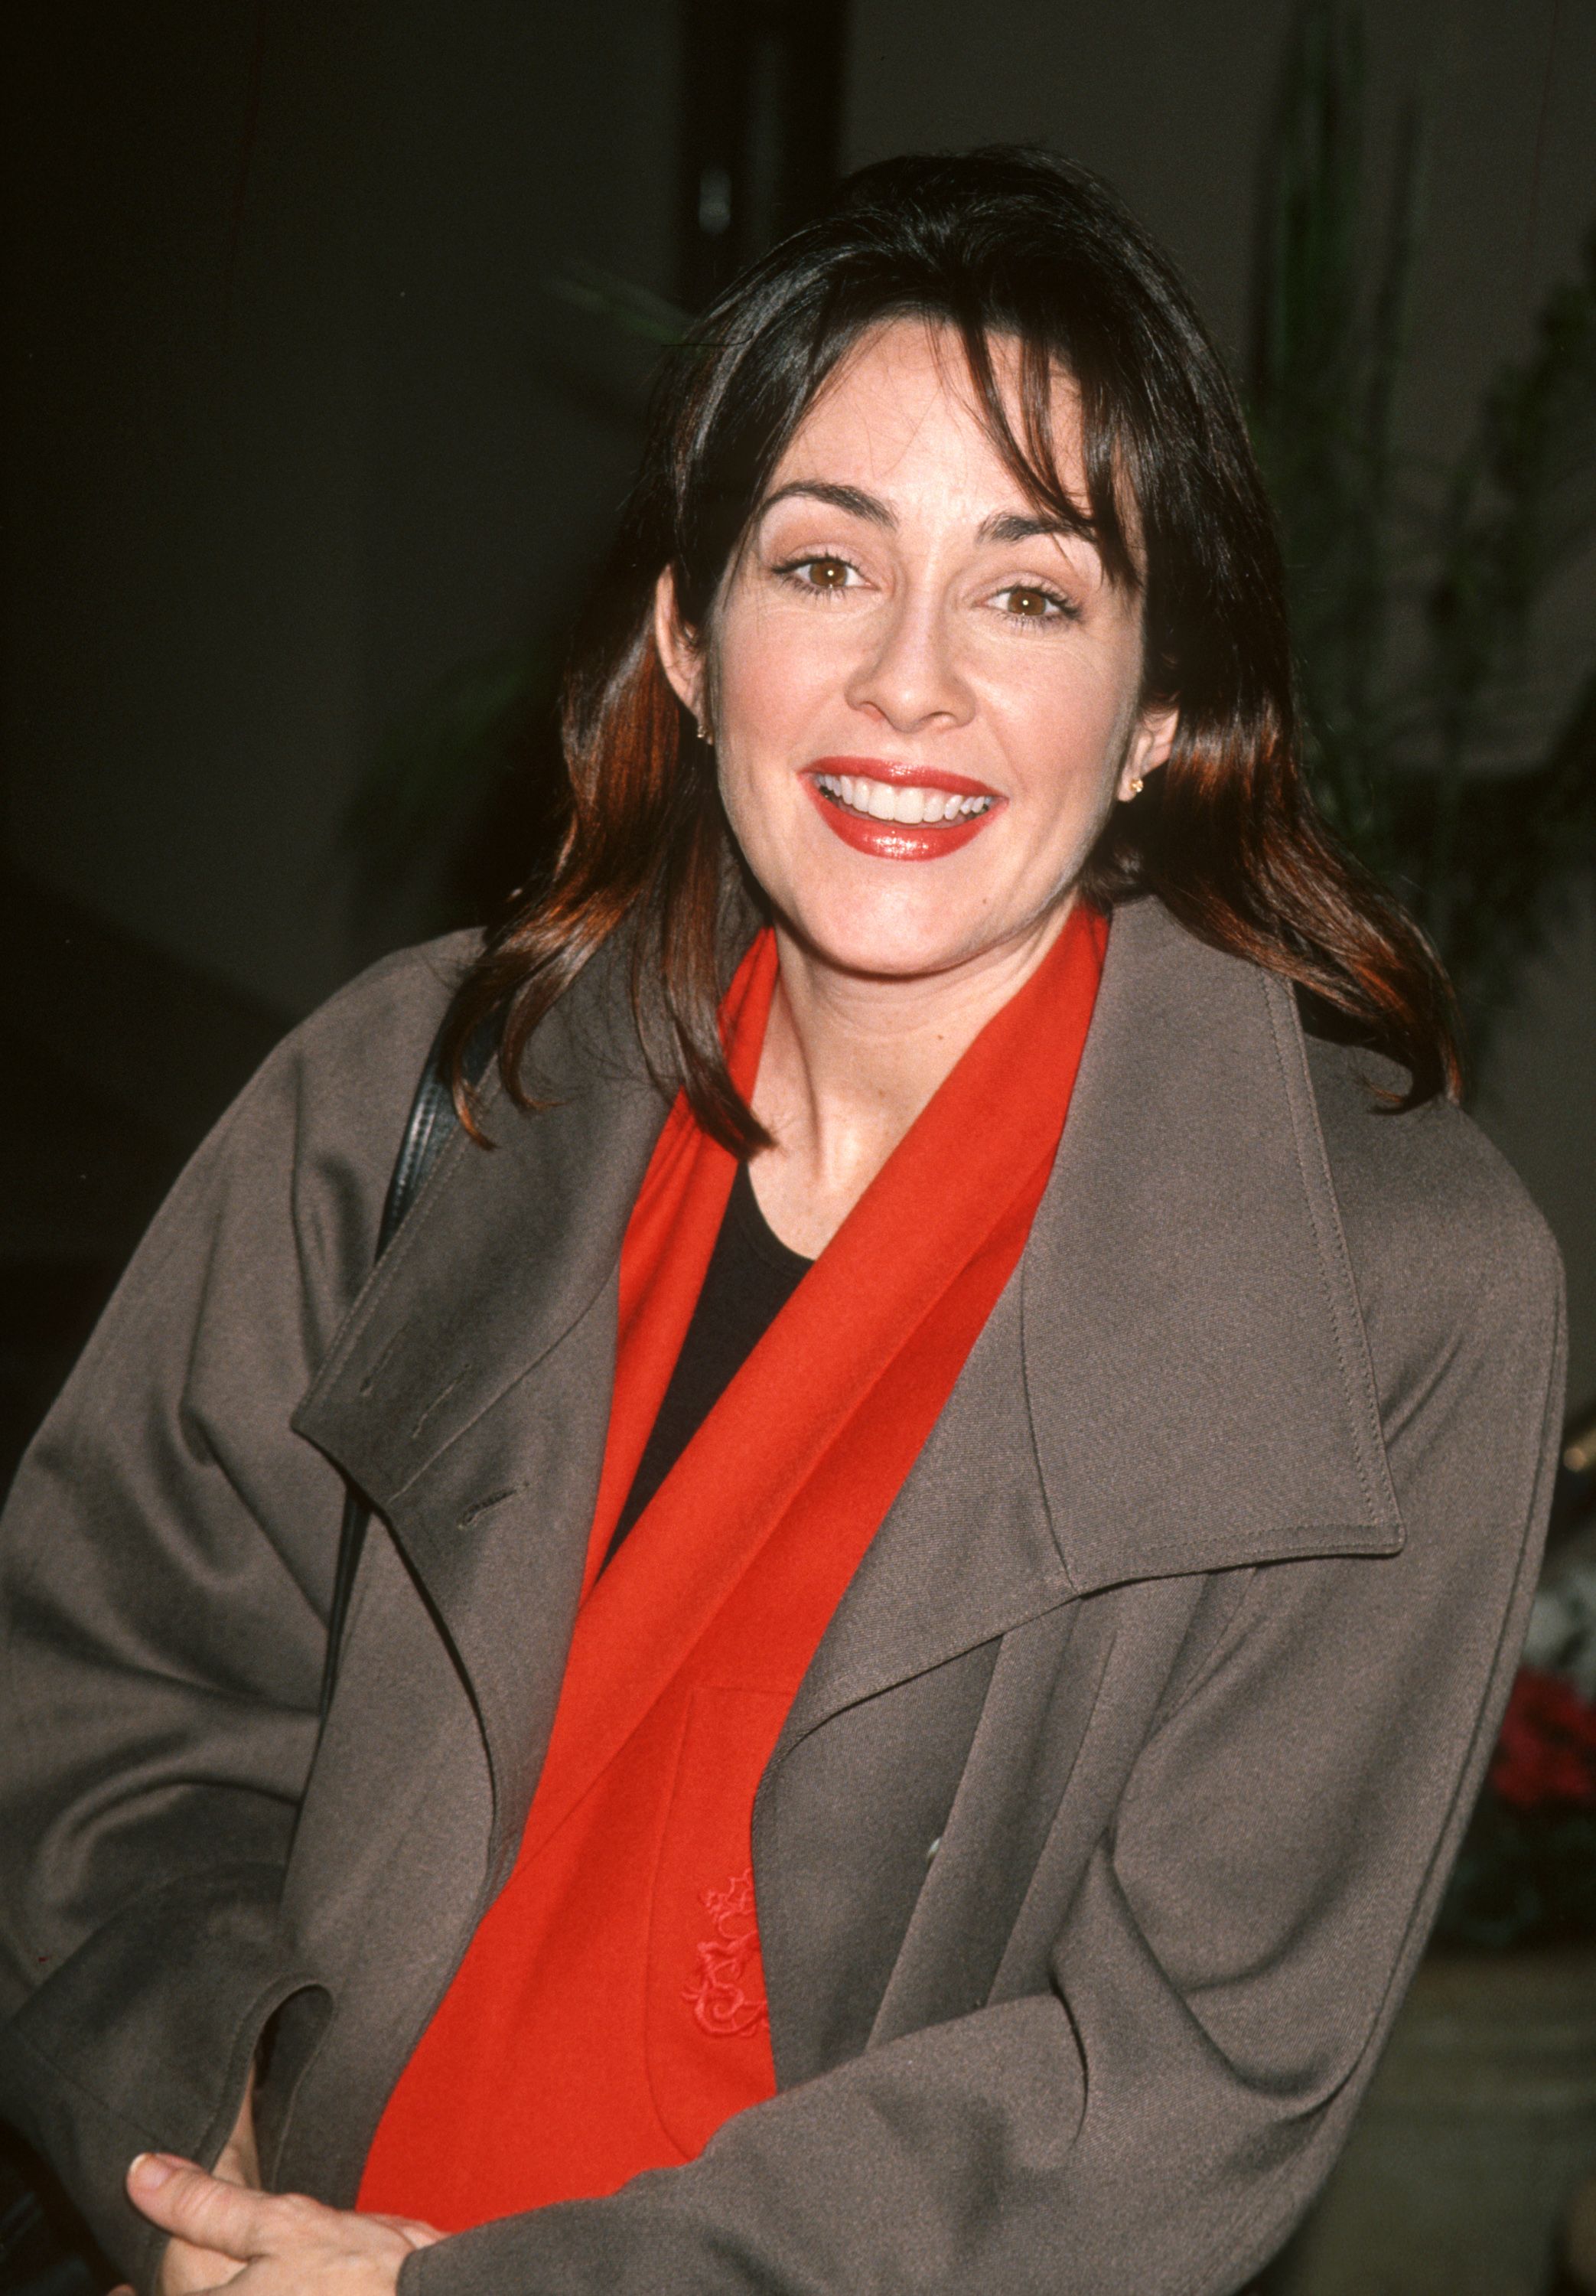 Patricia Heatod during the CBS Winter Press Tour in 1995 | Source: Getty Images